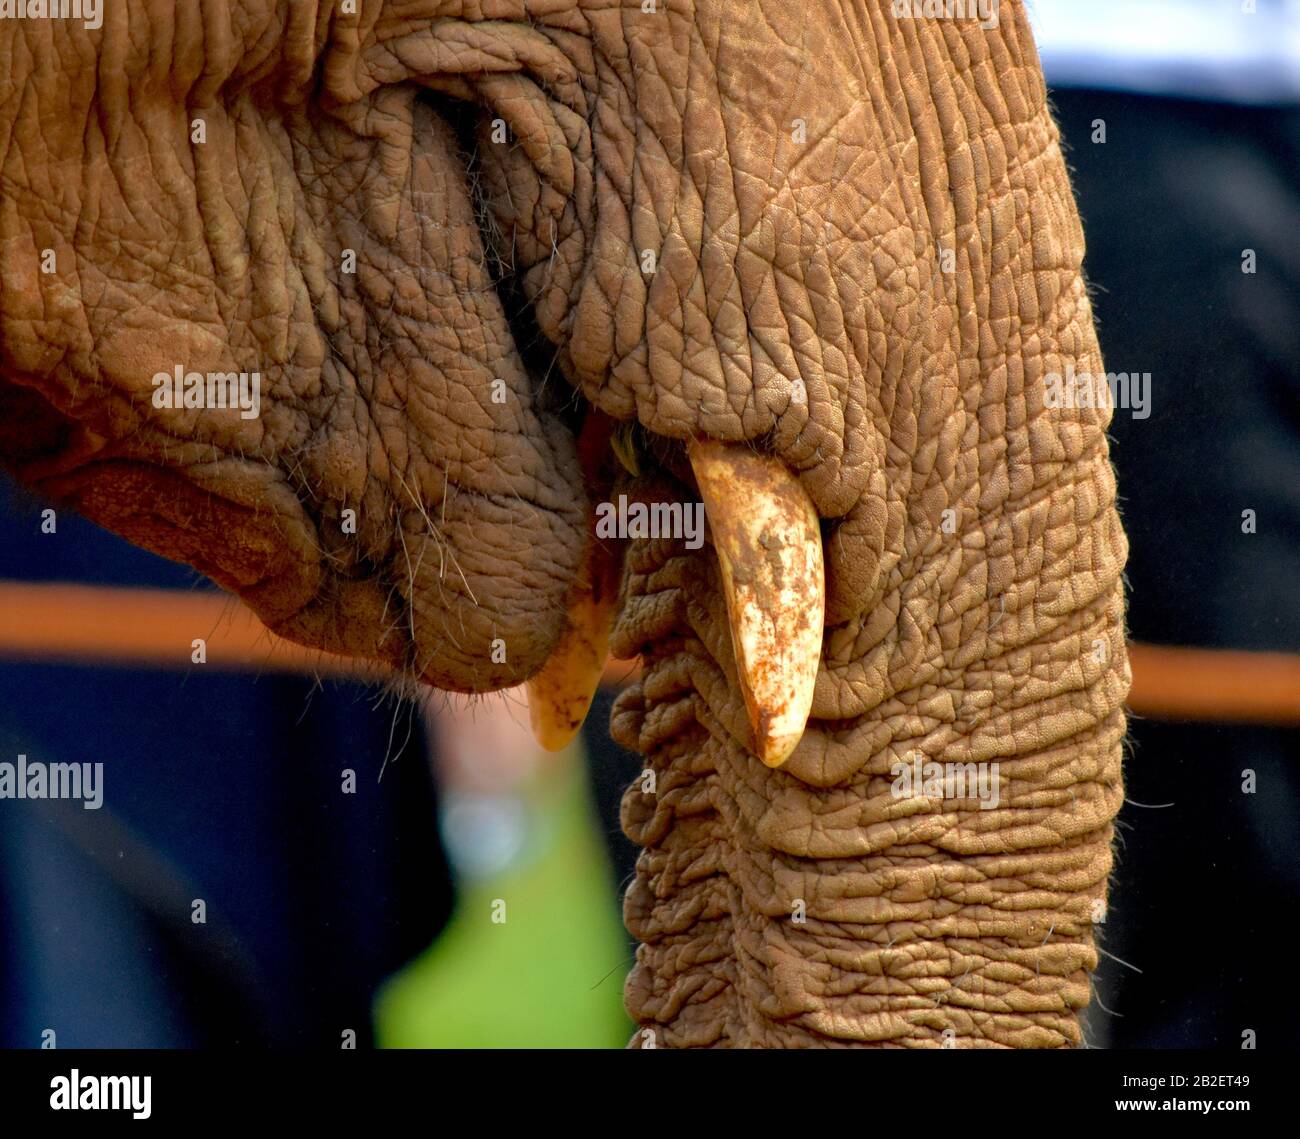 Closeup of a juvenile African elephant tusk, mouth and base of the trunk. (Loxodonata africana) Stock Photo